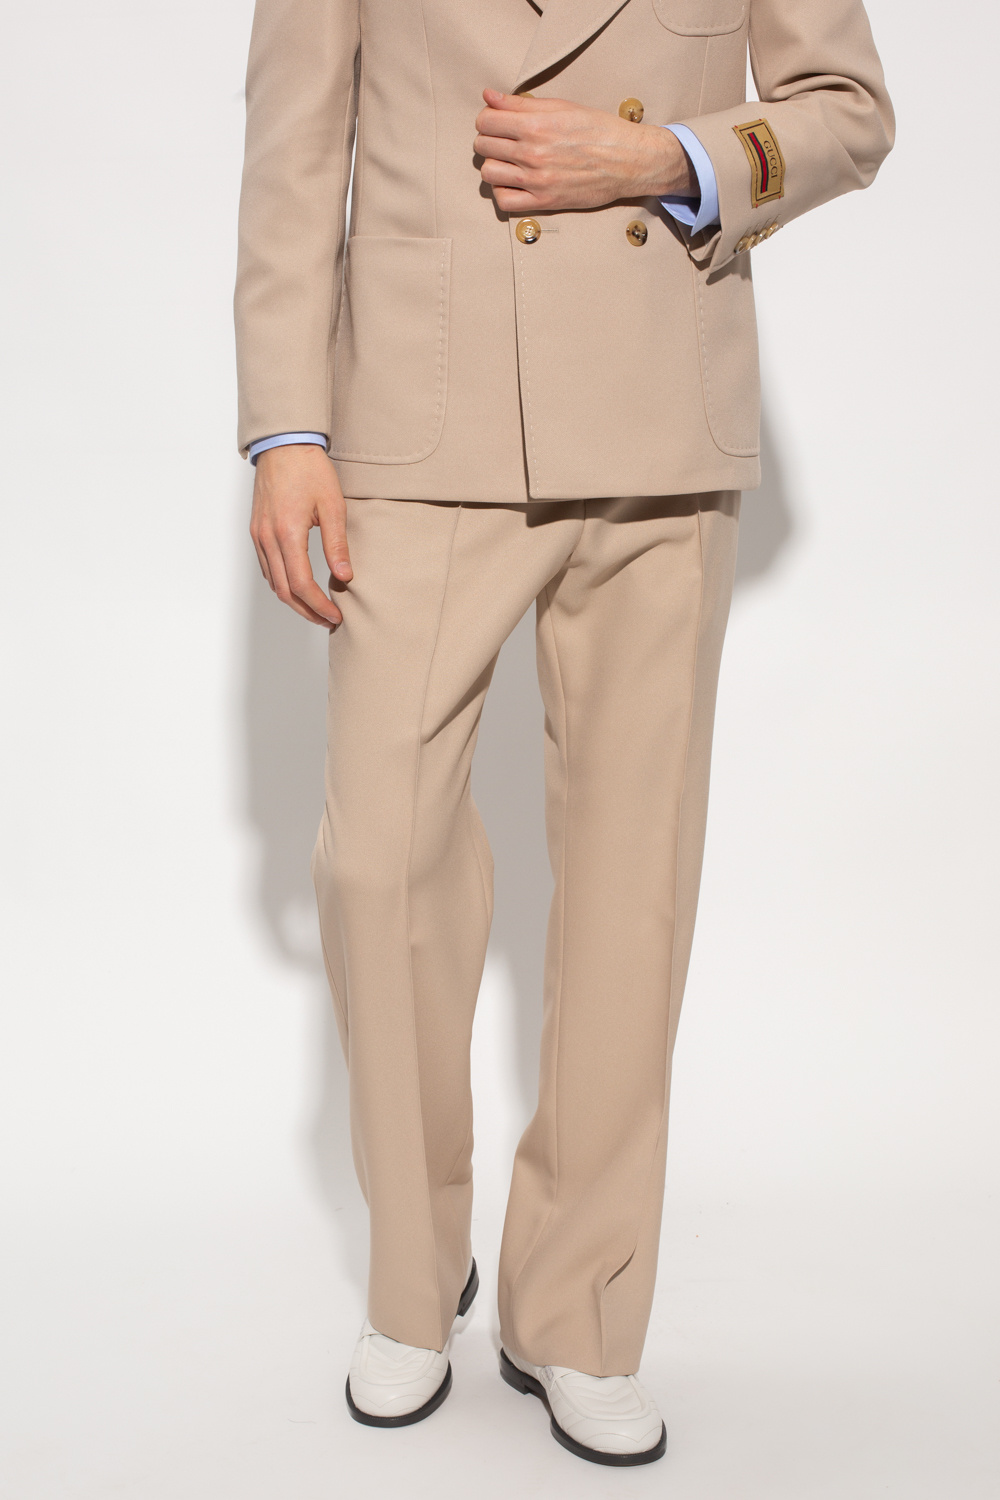 Gucci Pleat-front HIIT trousers